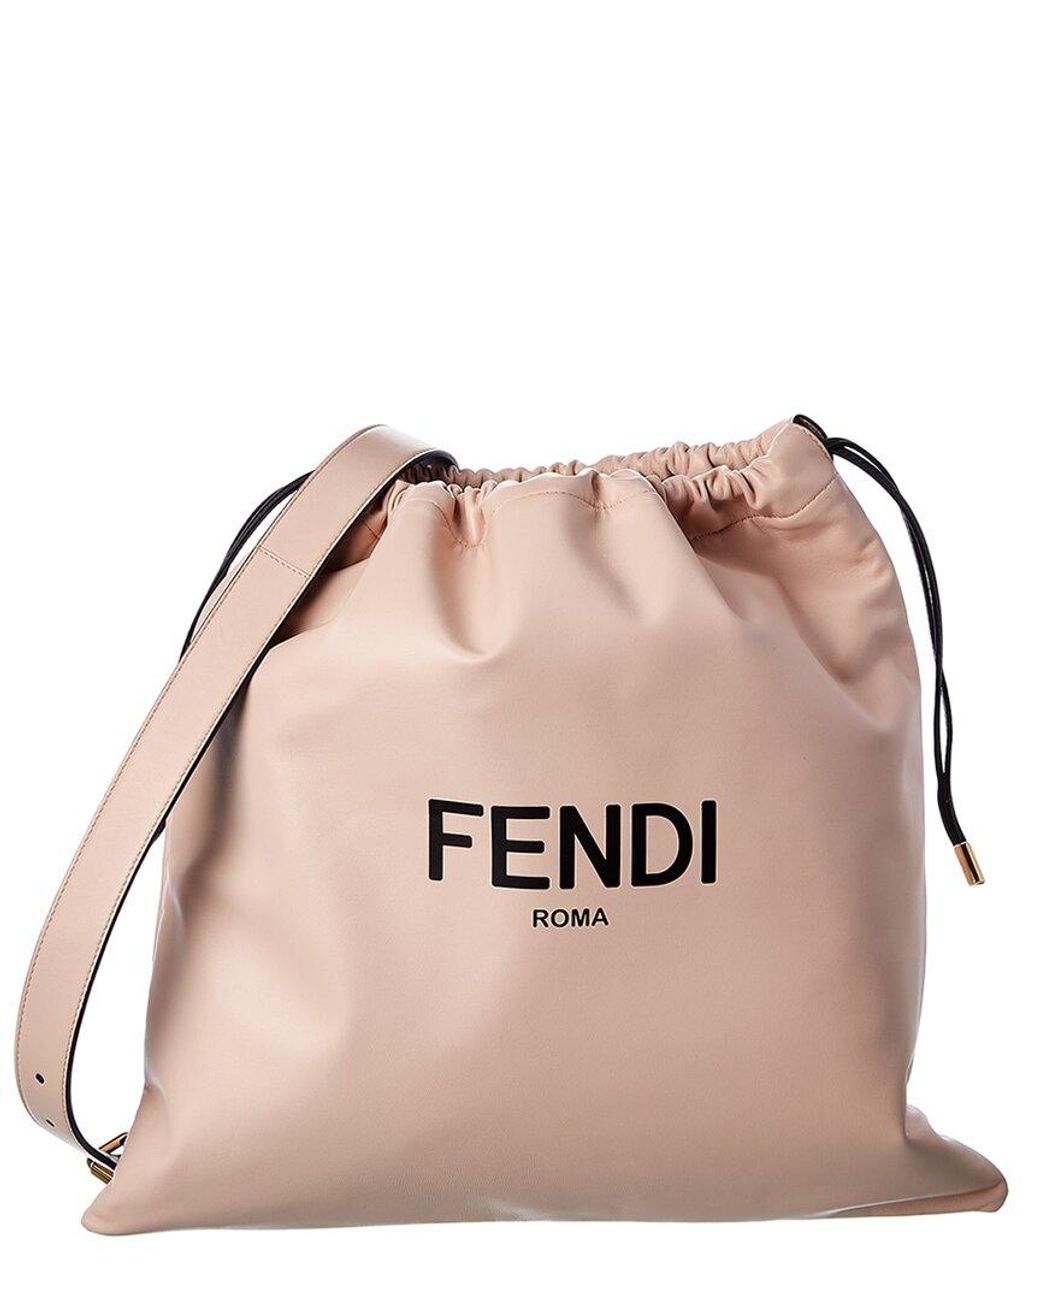 Fendi Pack Medium Leather Pouch in Pink - Lyst